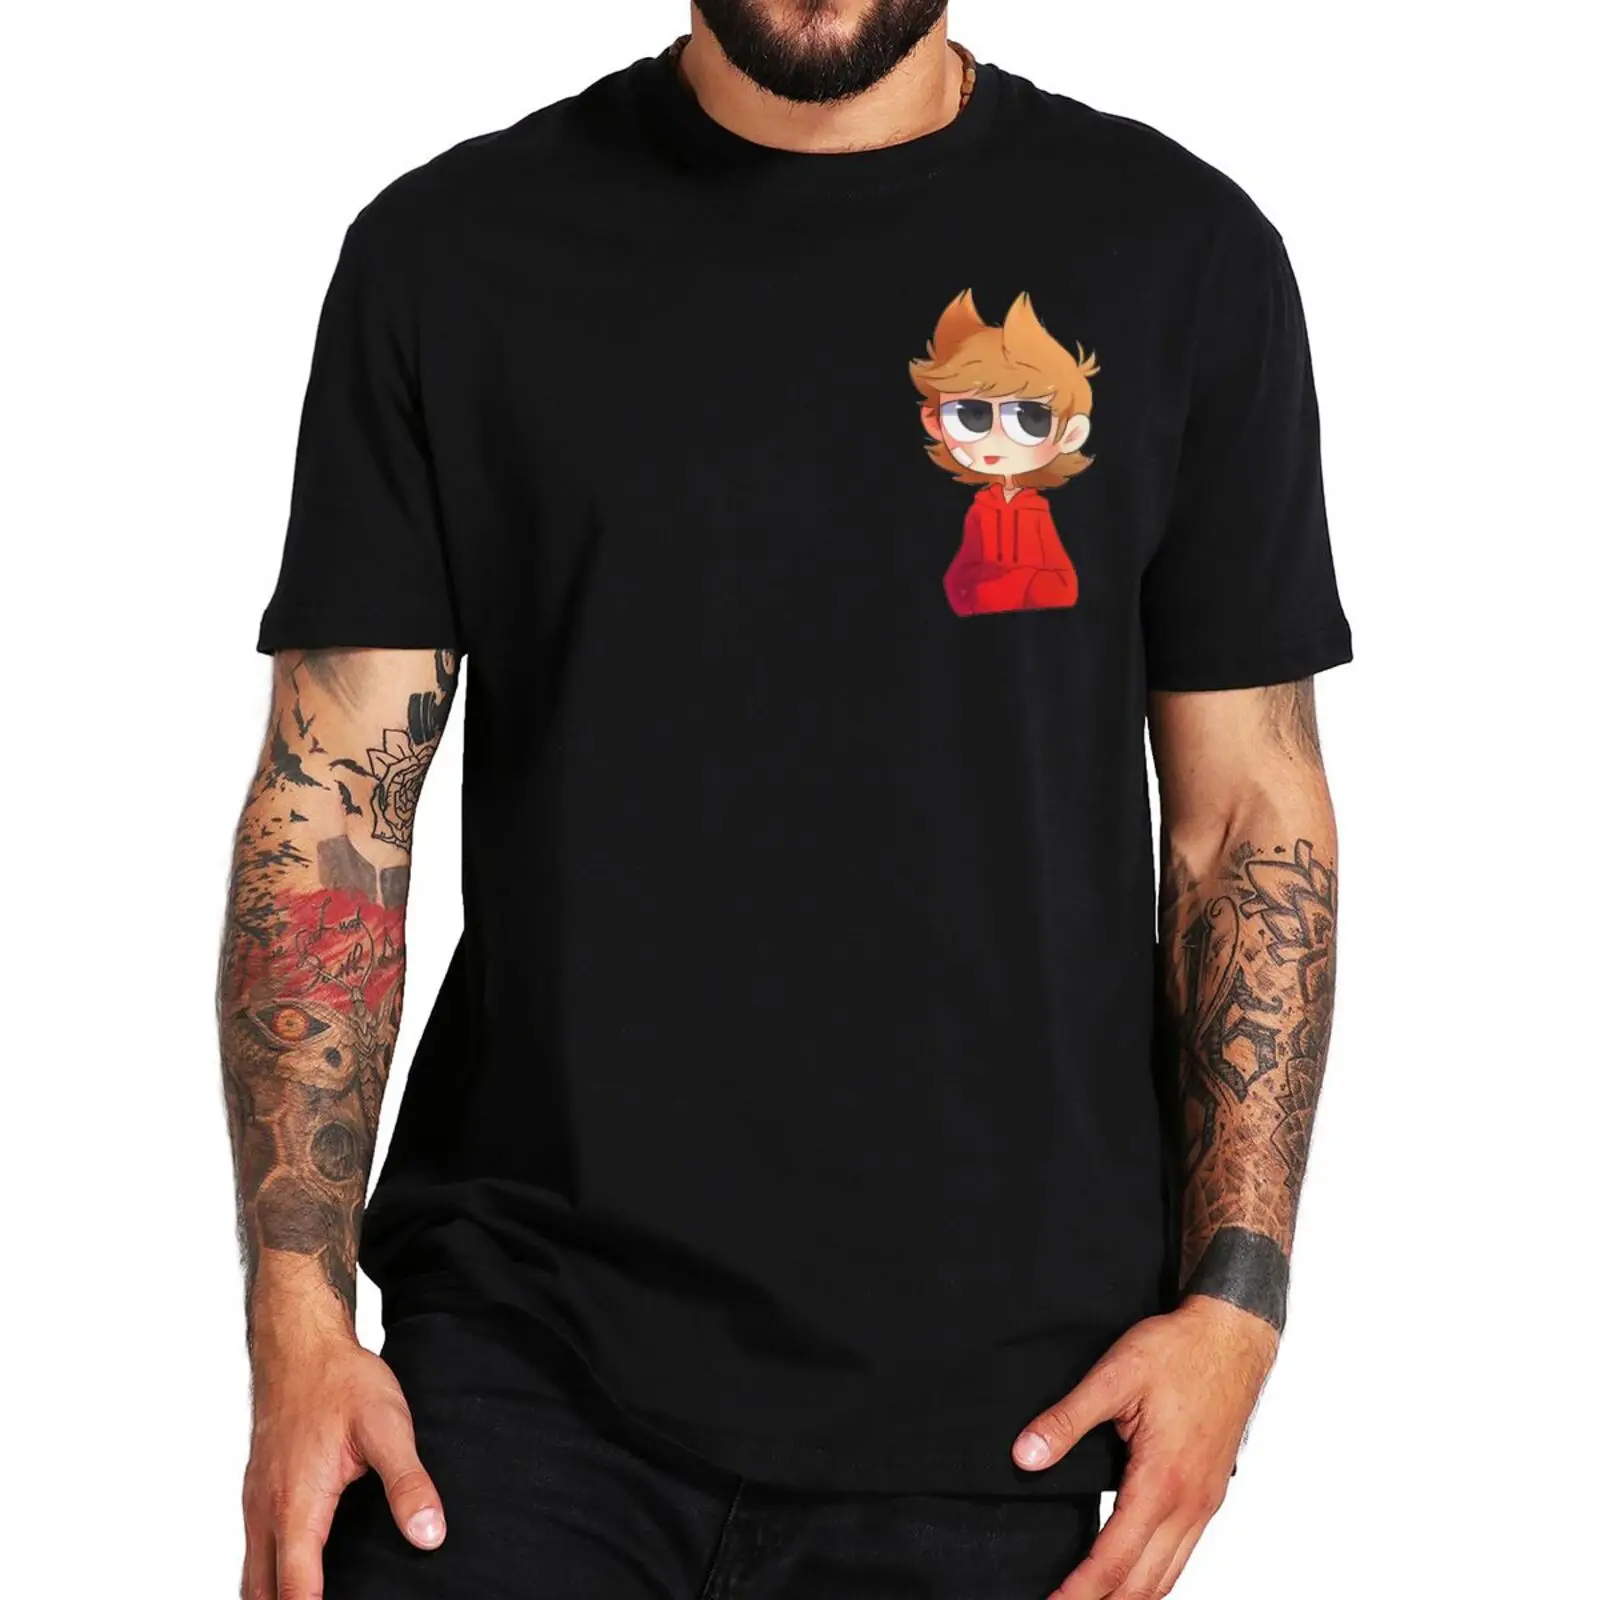 

Tord Eddsworld Anime Cute T Shirt British Animated Comedy Web Series Classic Tshirt 100% Cotton Oversize Novelty Tee Tops